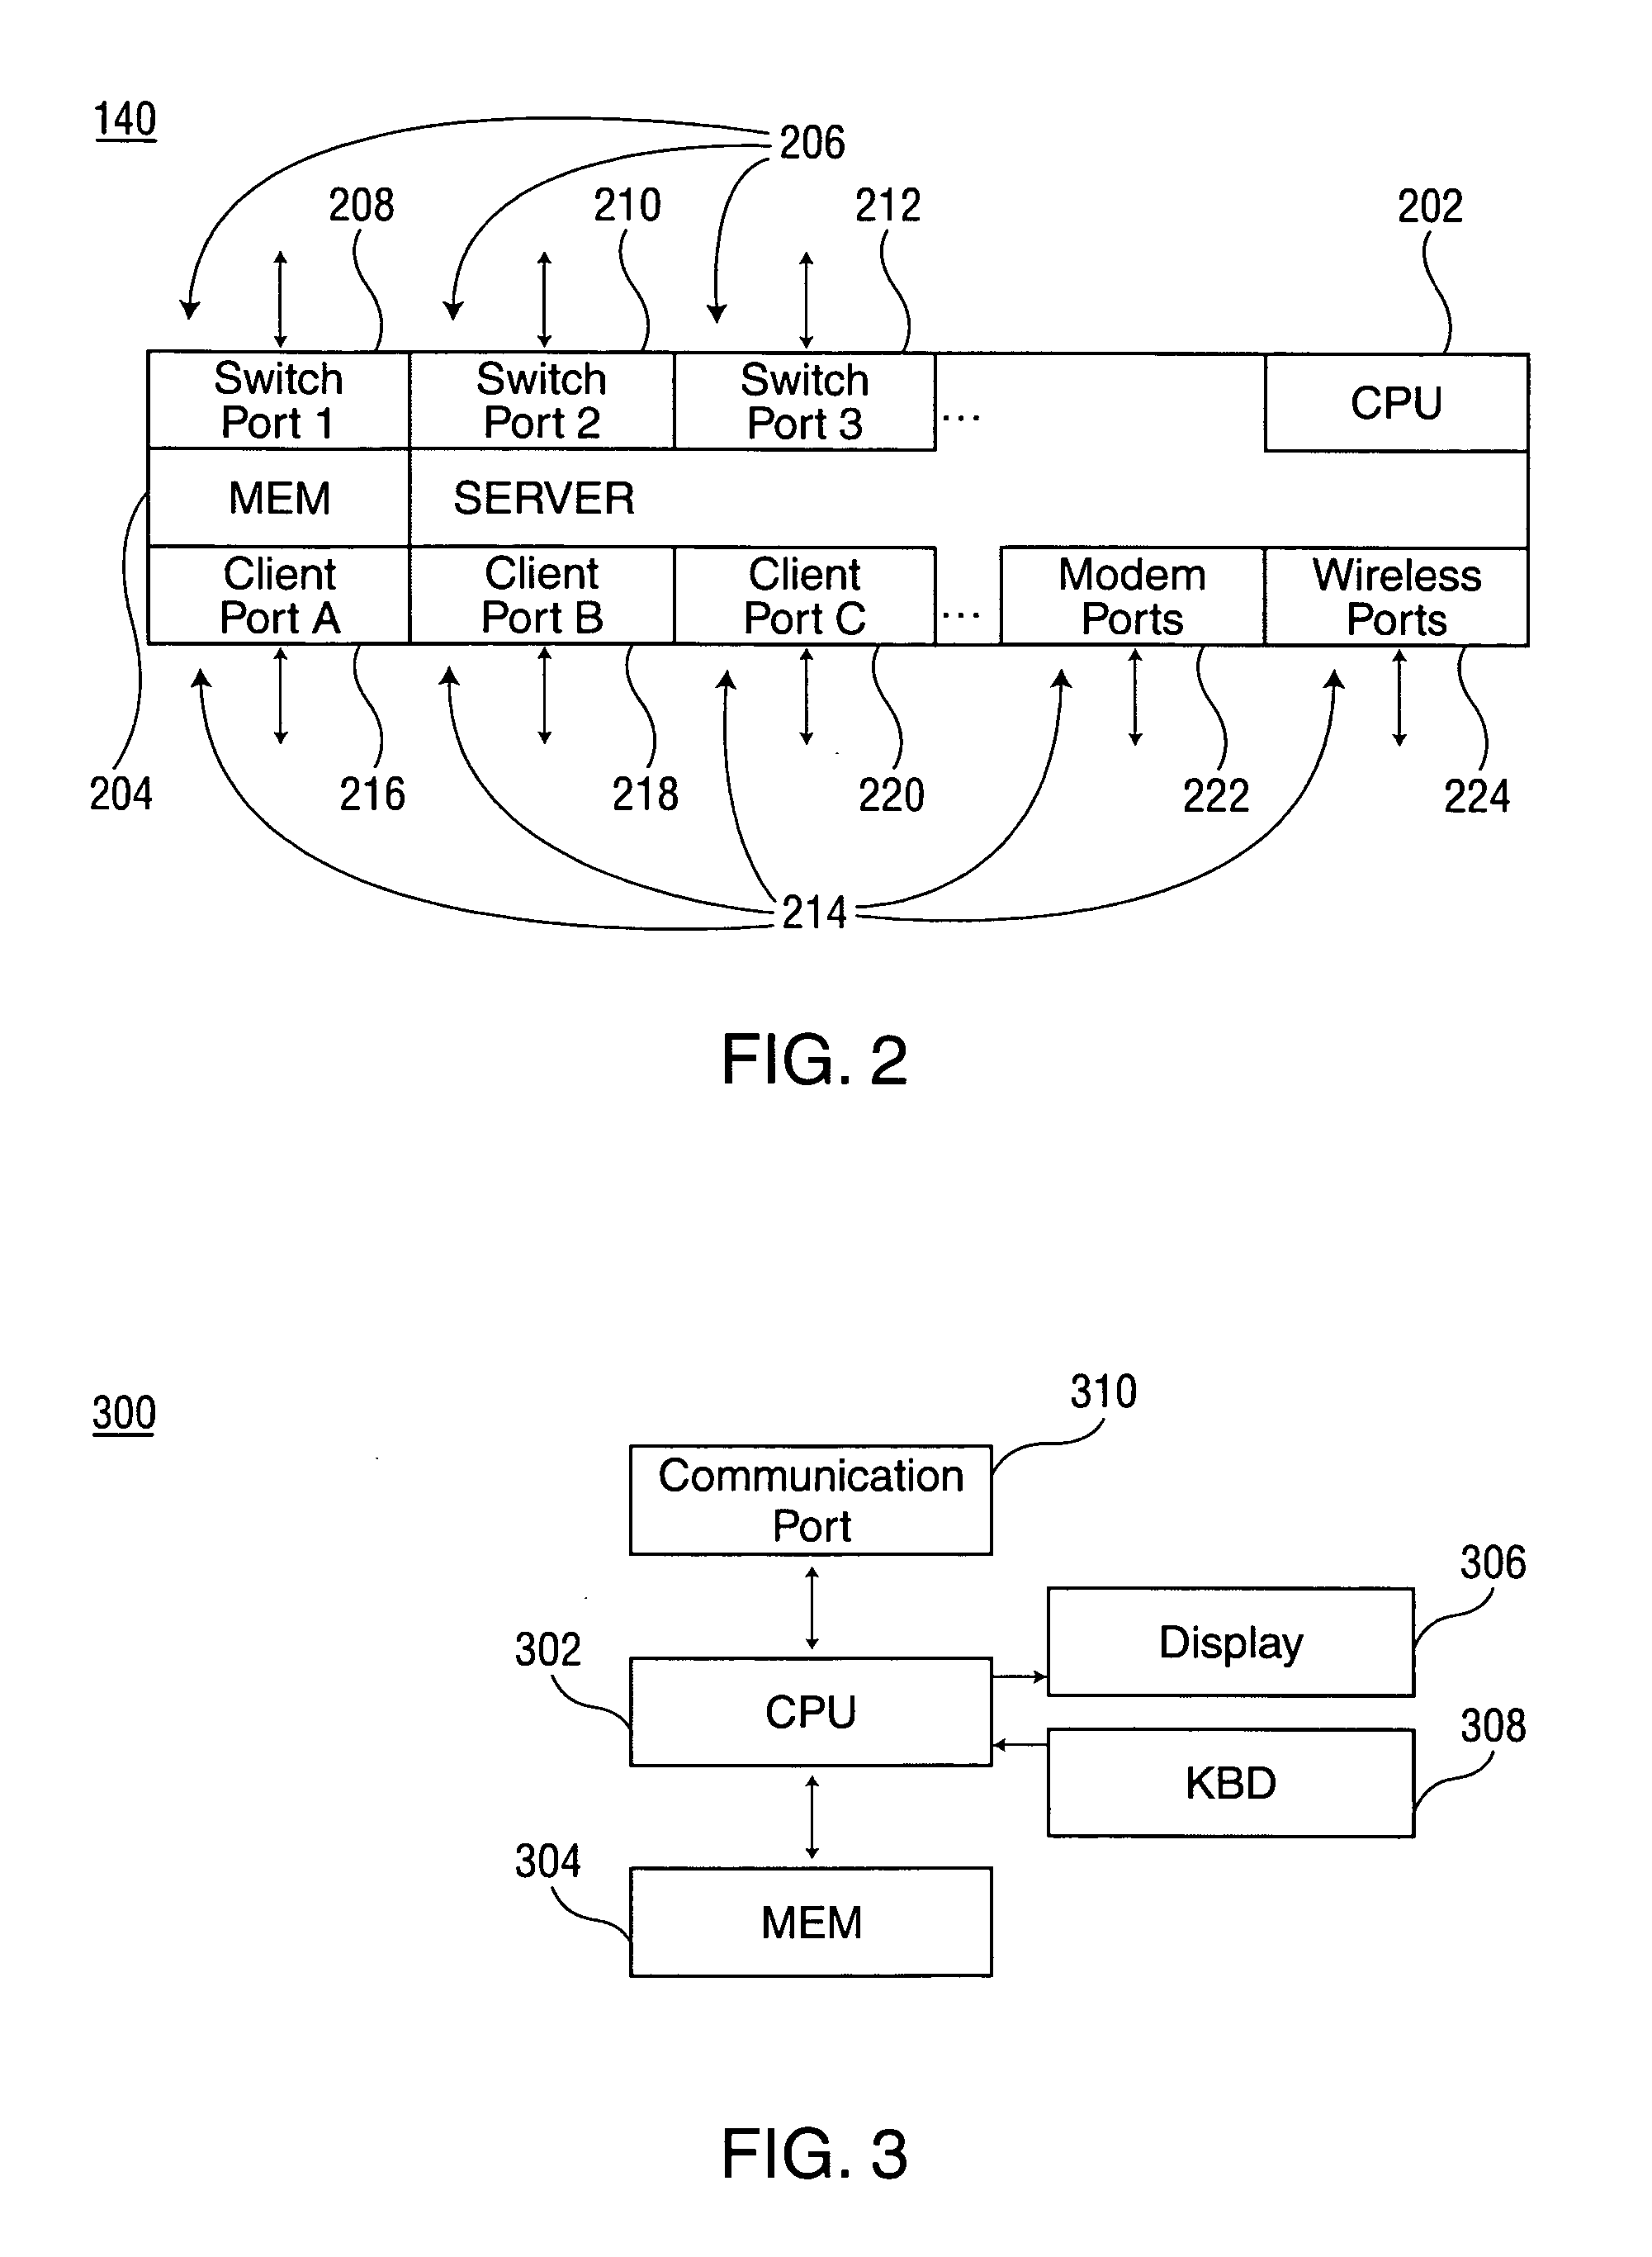 Method and apparatus for tracking call processing failure data in a radiotelephone system